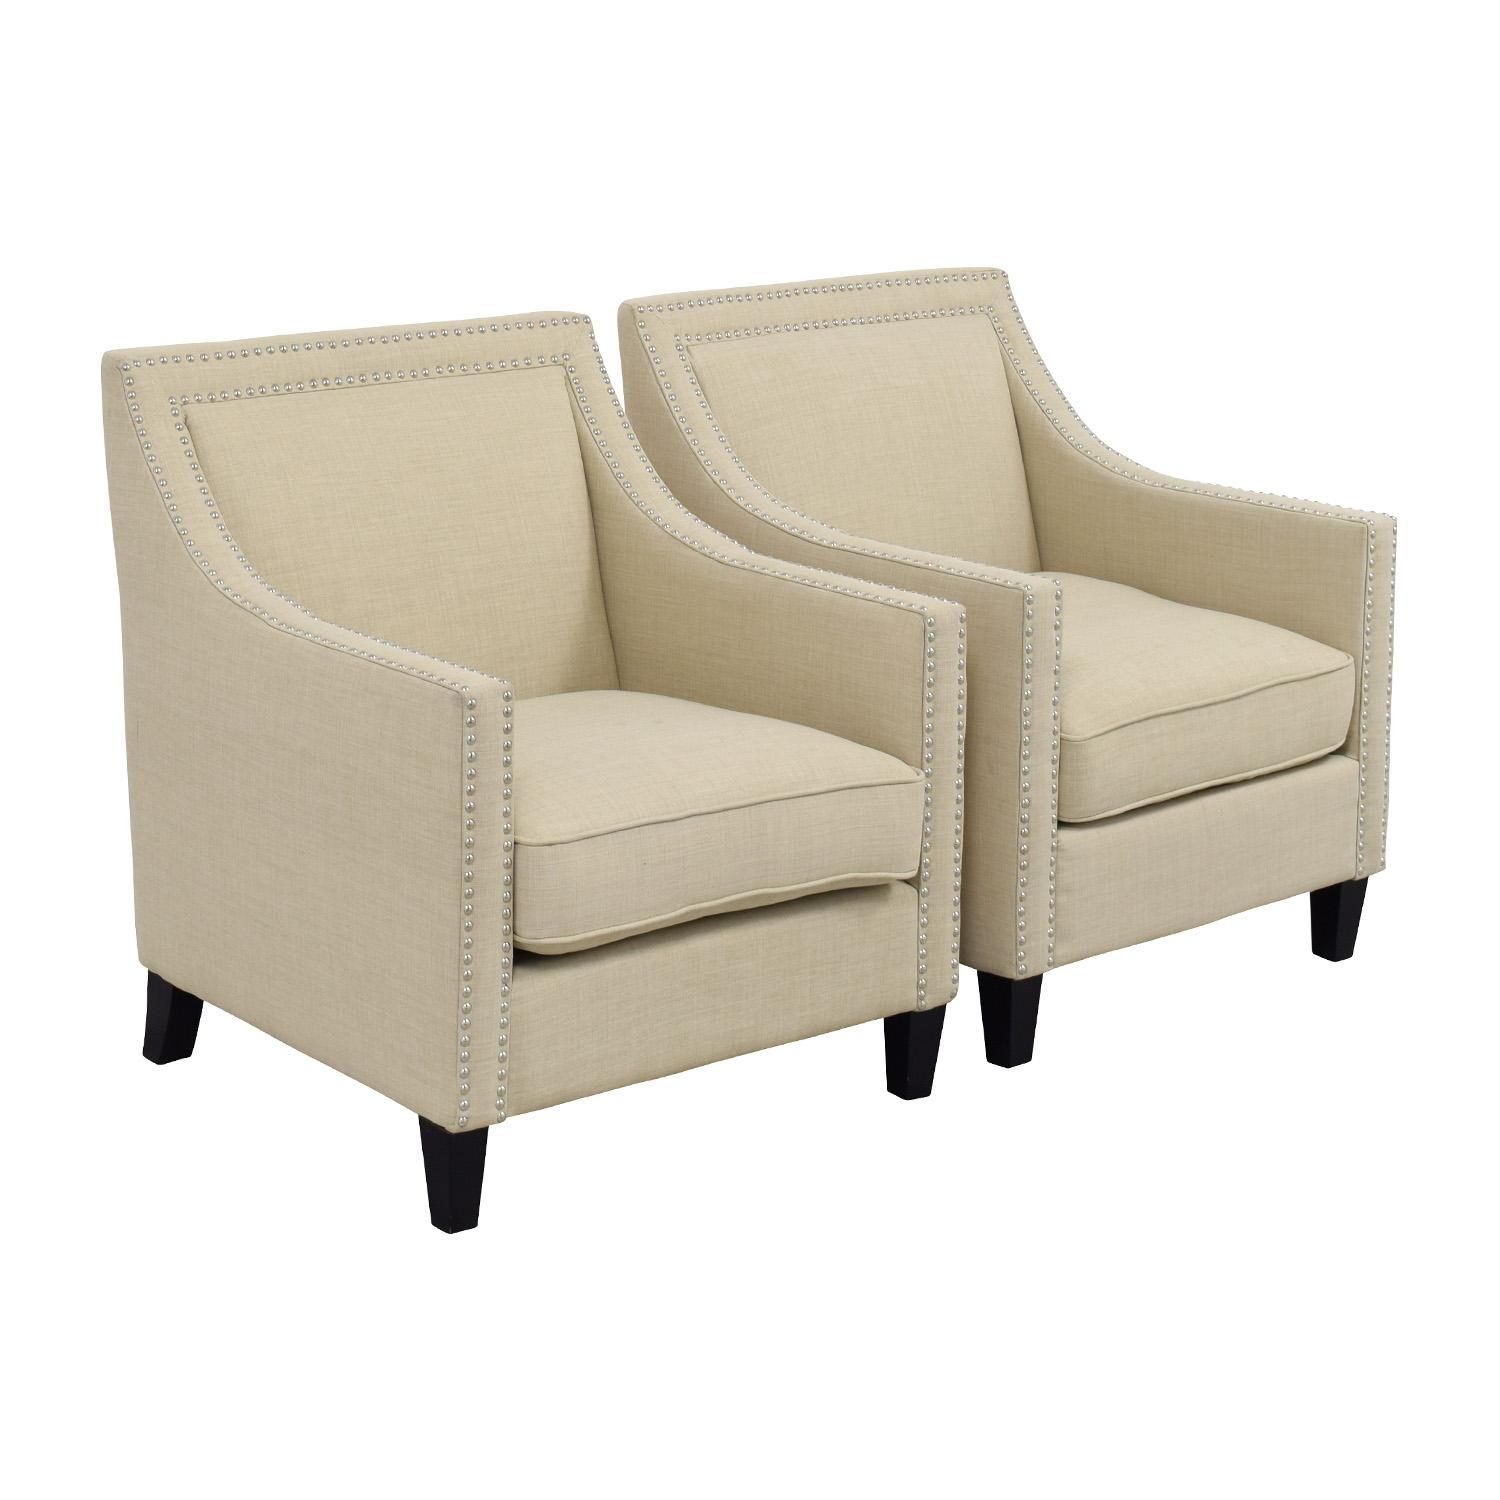 67% Off – Studded Beige Sofa Arm Chairs / Chairs Pertaining To Sofa Arm Chairs (View 19 of 20)